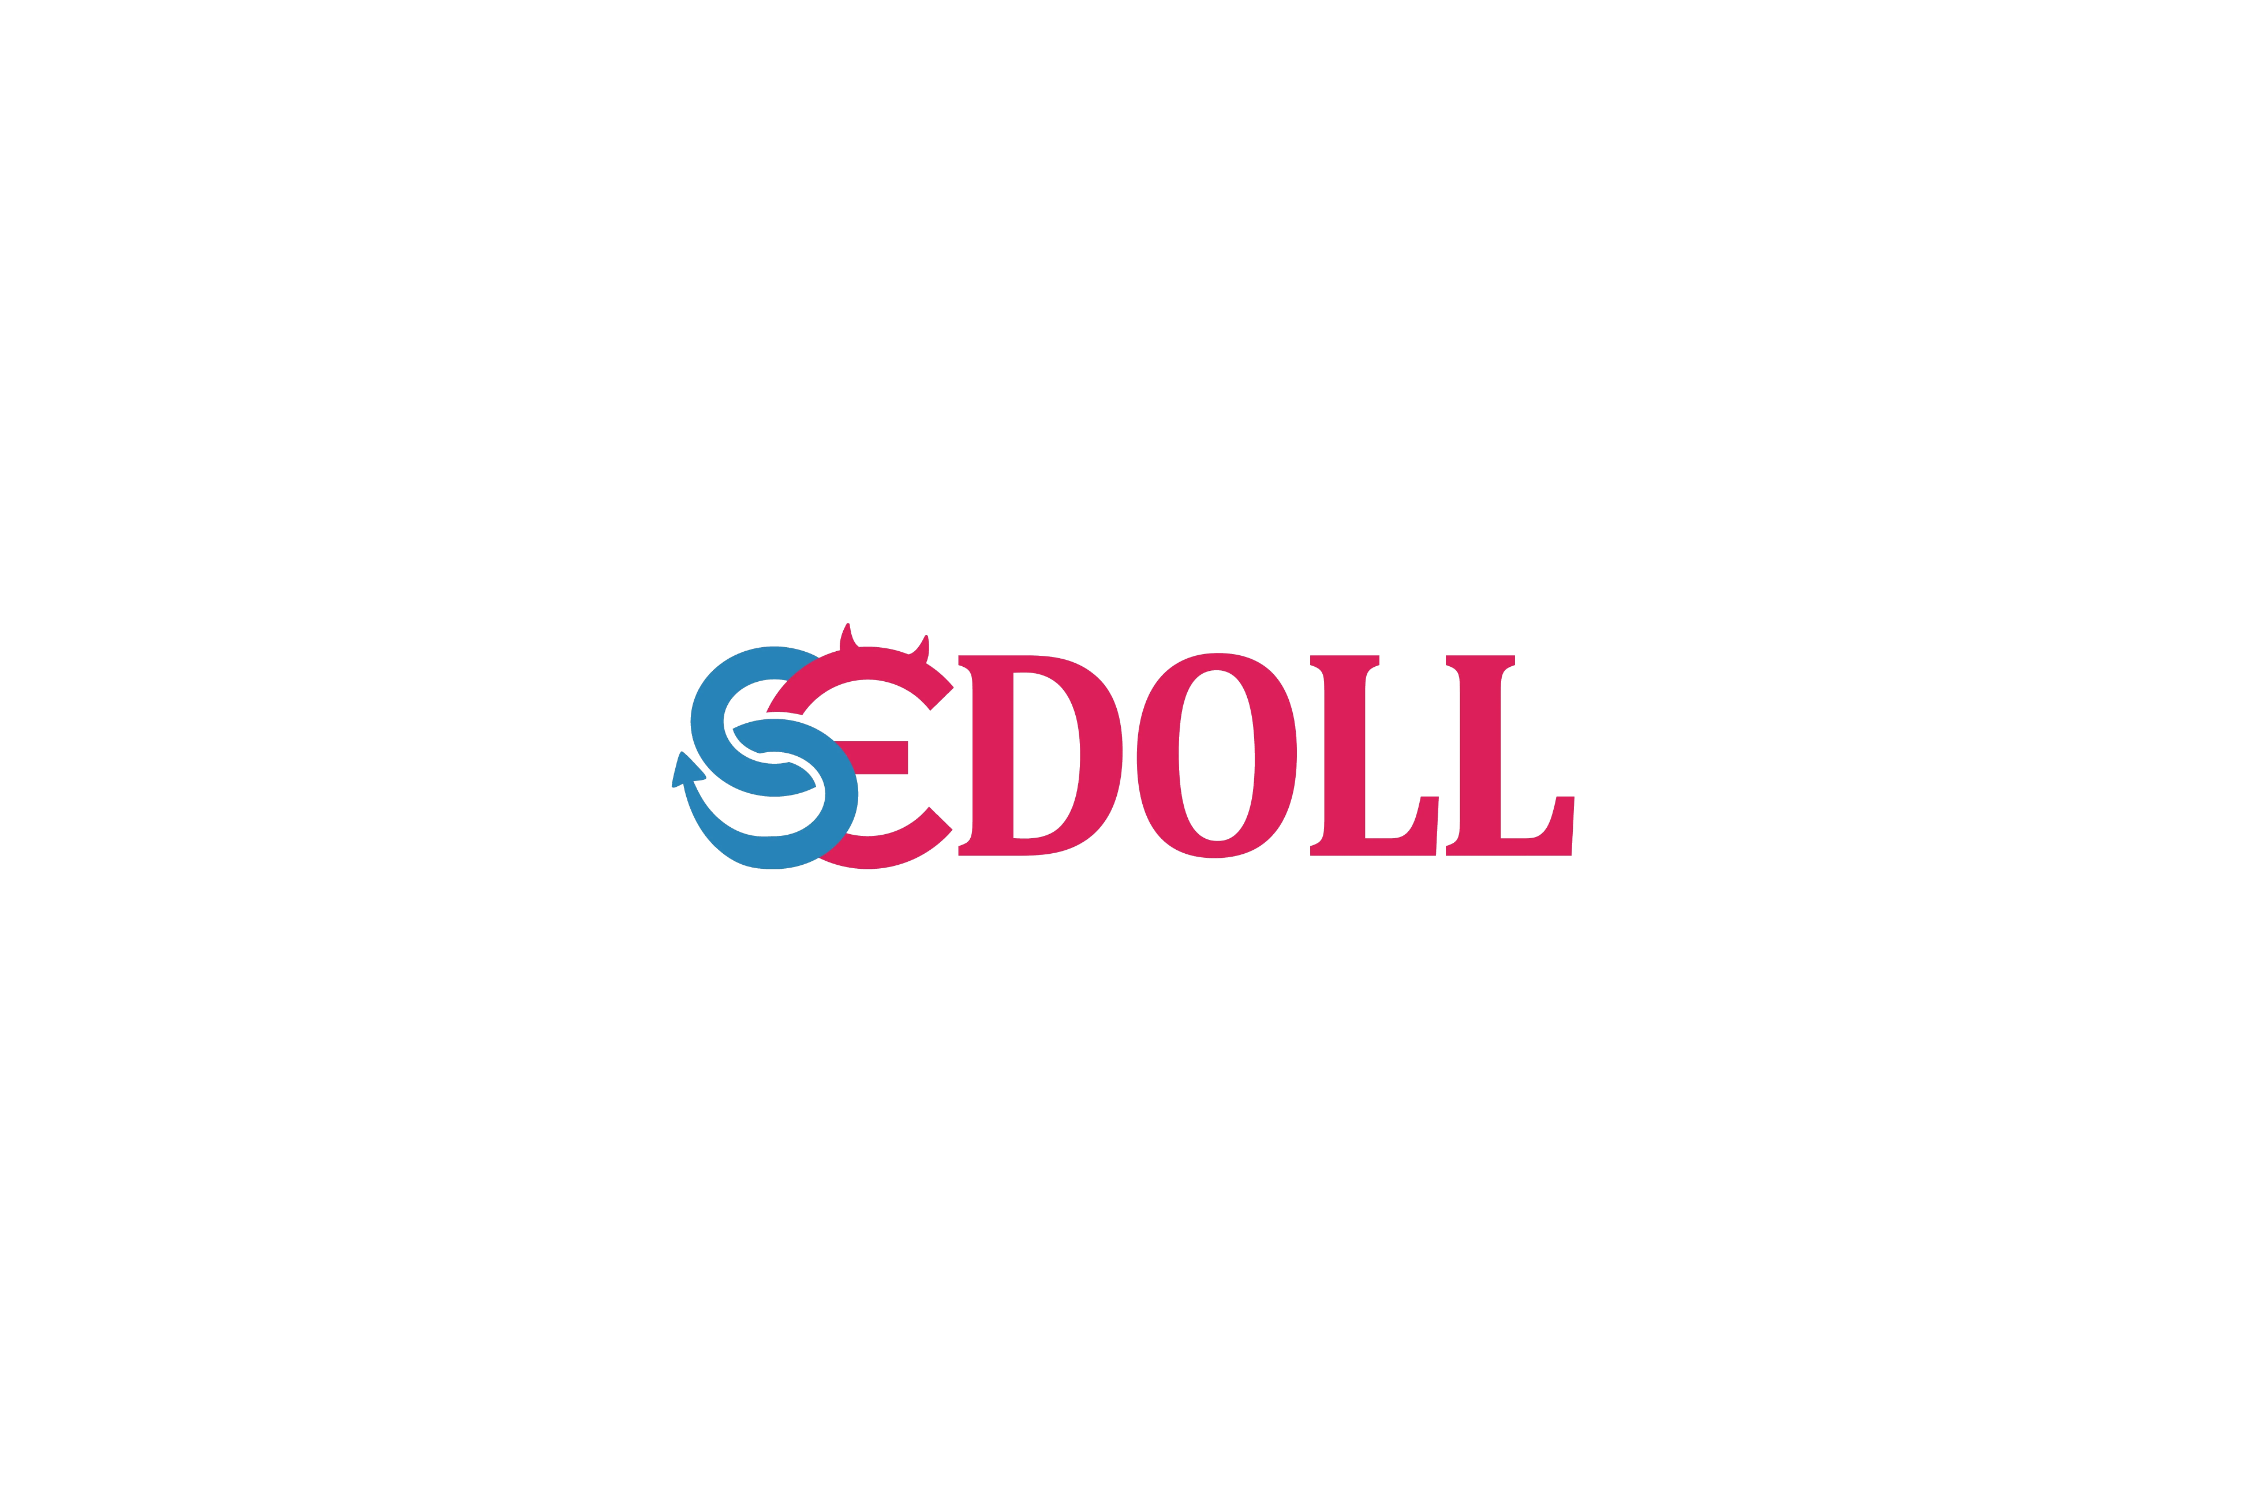 SEDOLL is a Manufacturer of High-Quality Sex Dolls.